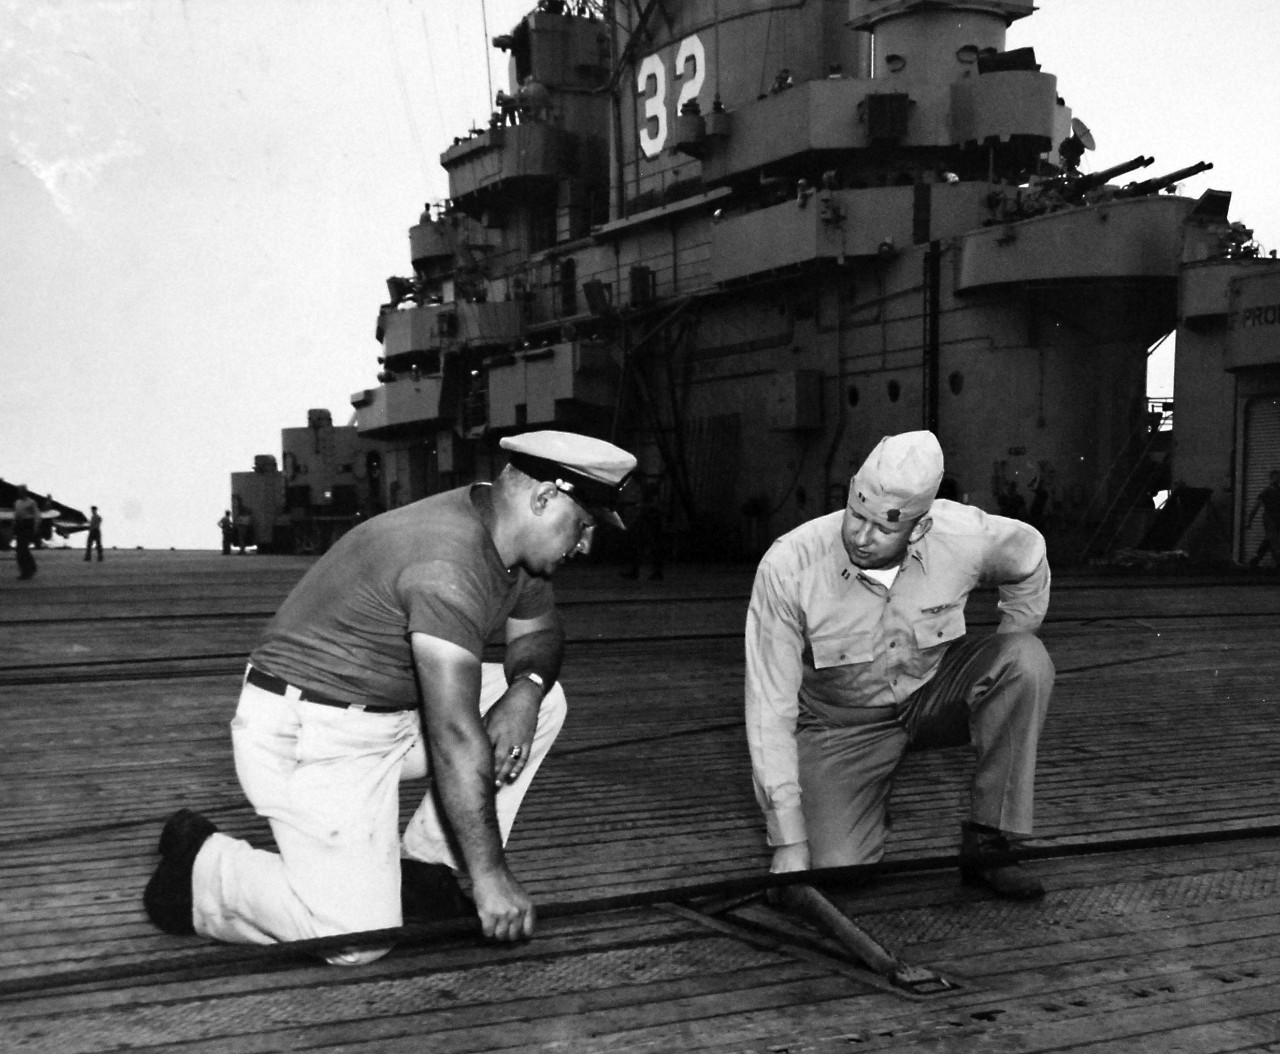 80-G-405968: USS Leyte (CV-32), June 1949.   Reserve Cruise Onboard.  Left to right:  ABC E.C. Endres, USN, and LT C.L. Schulten, USNR, inspecting the cross deck pendants on the flight deck.   Official U.S. Navy photograph, now in the collections of the National Archives.  (2017/02/07).